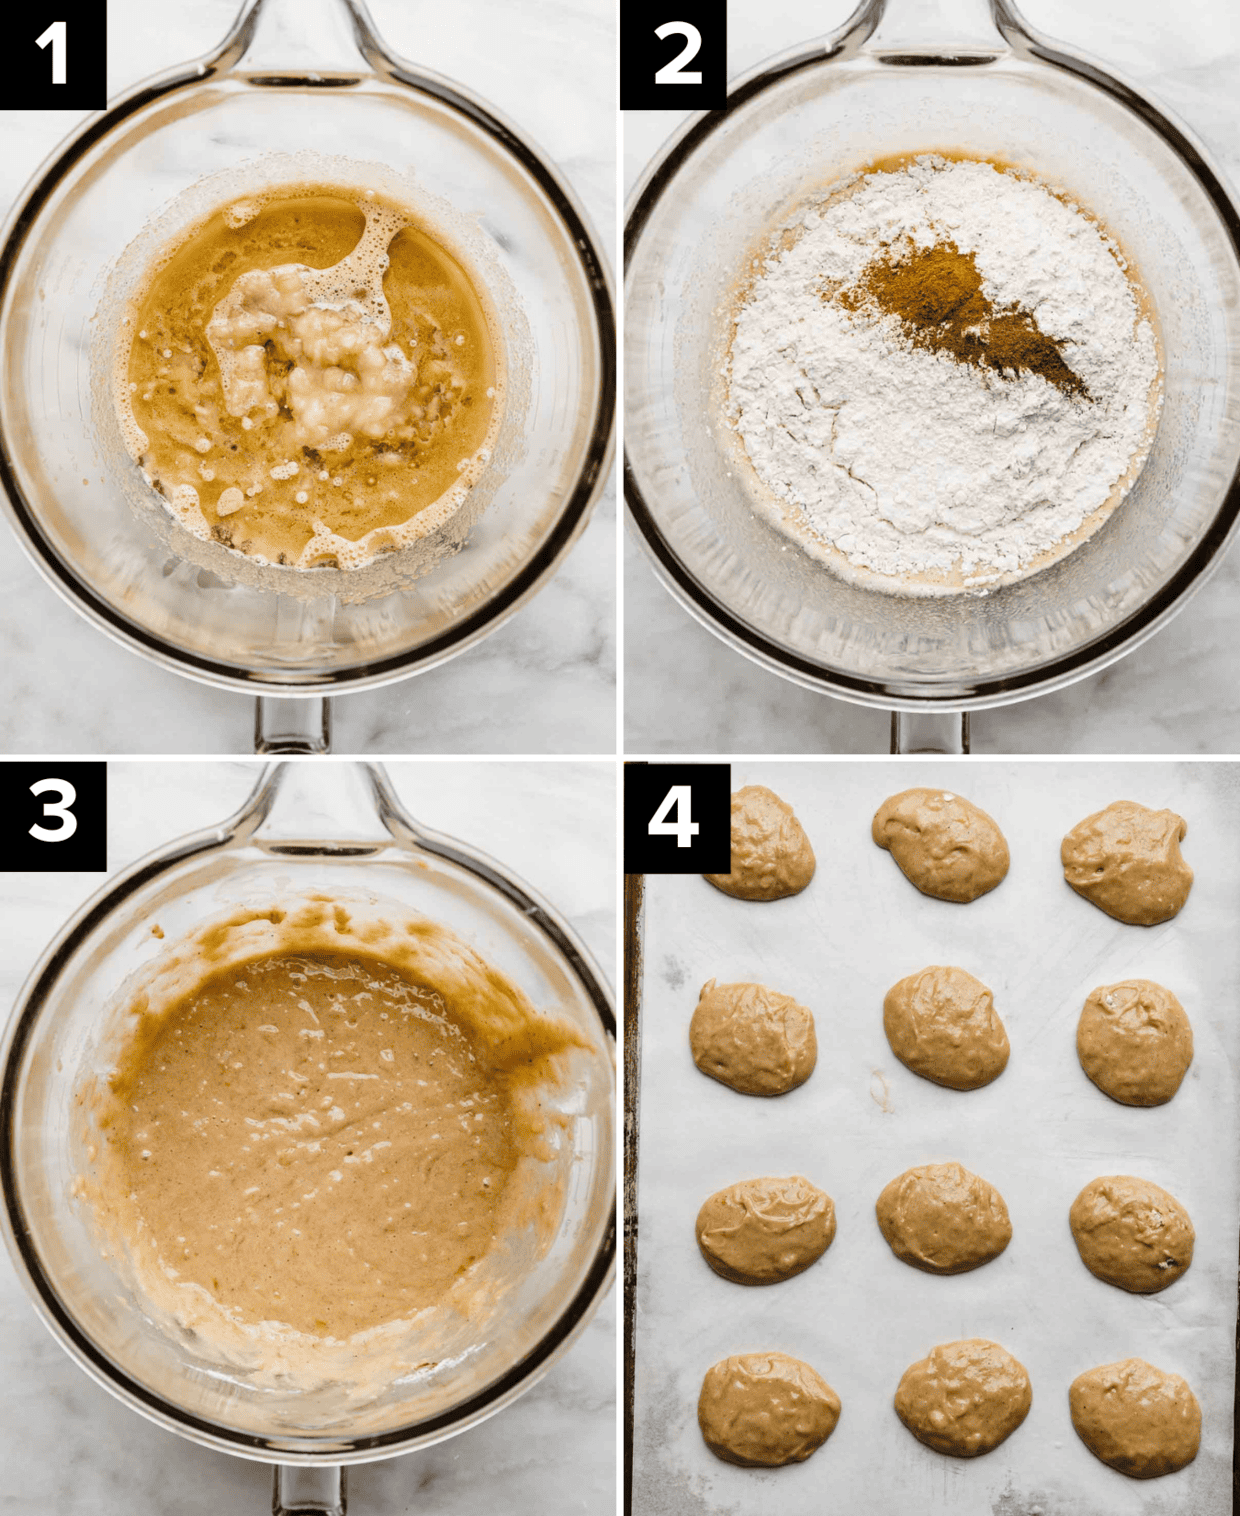 Four images showing the process of making banana cookies batter in a glass bowl.